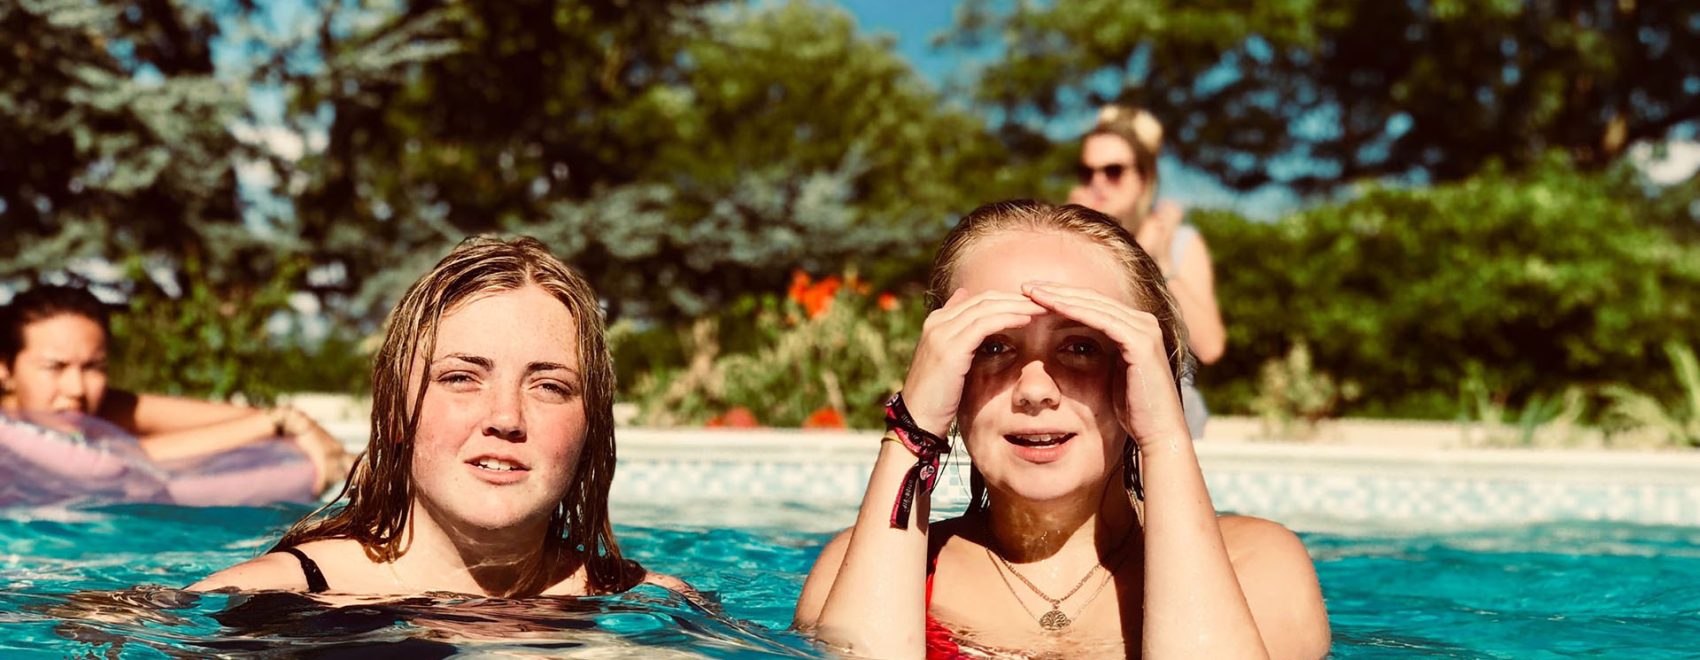 Photo of teenagers relaxing in the pool during the summer.